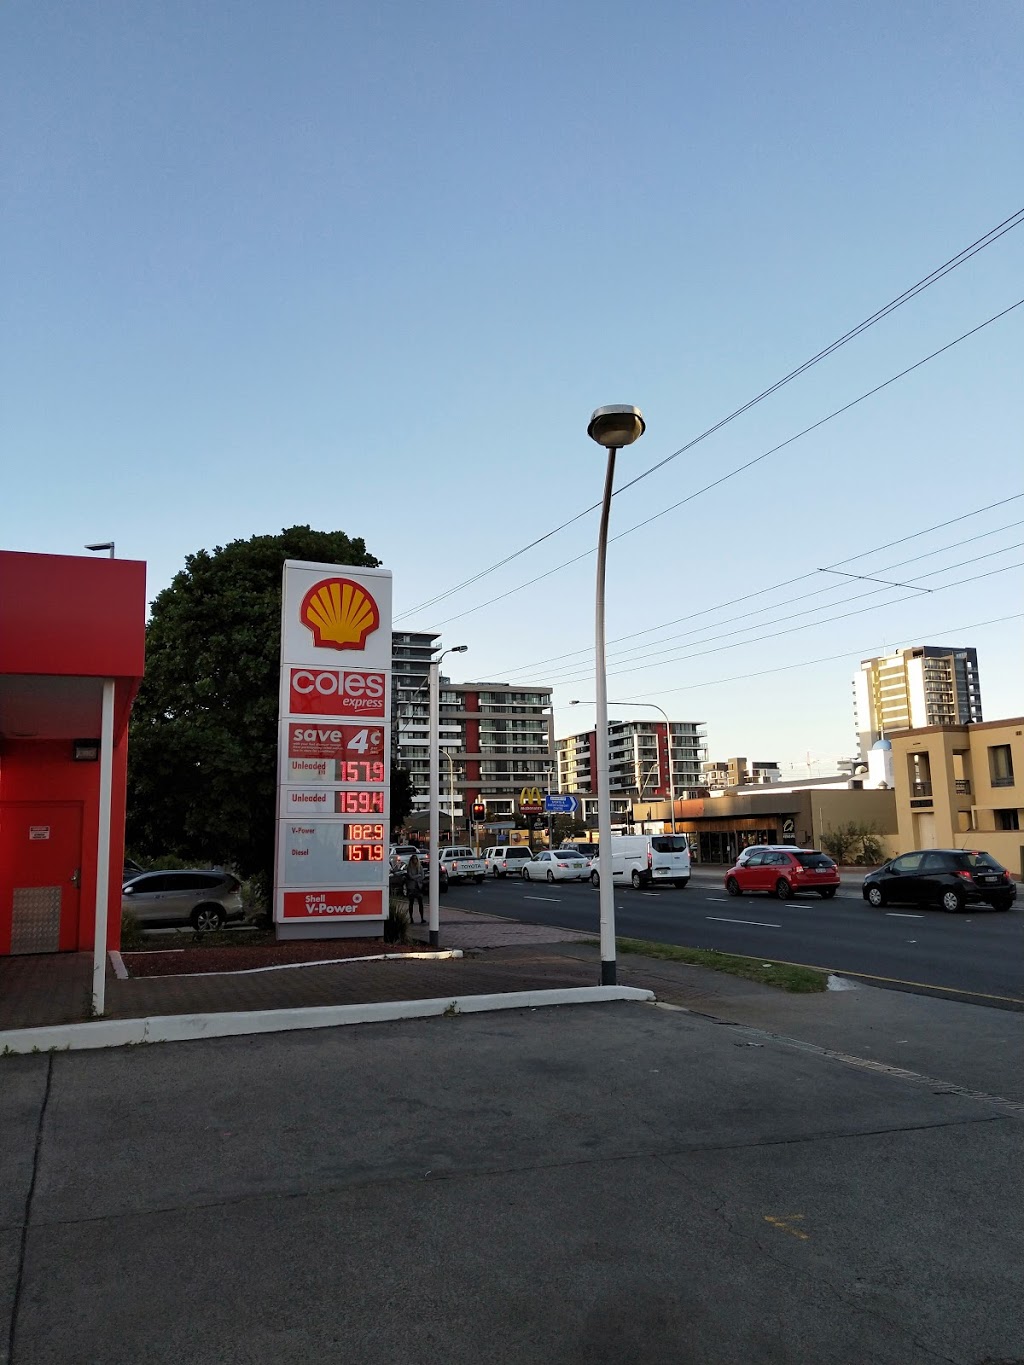 Coles Express Wollongong | gas station | 142-148 Corrimal St, Wollongong NSW 2500, Australia | 0242257012 OR +61 2 4225 7012